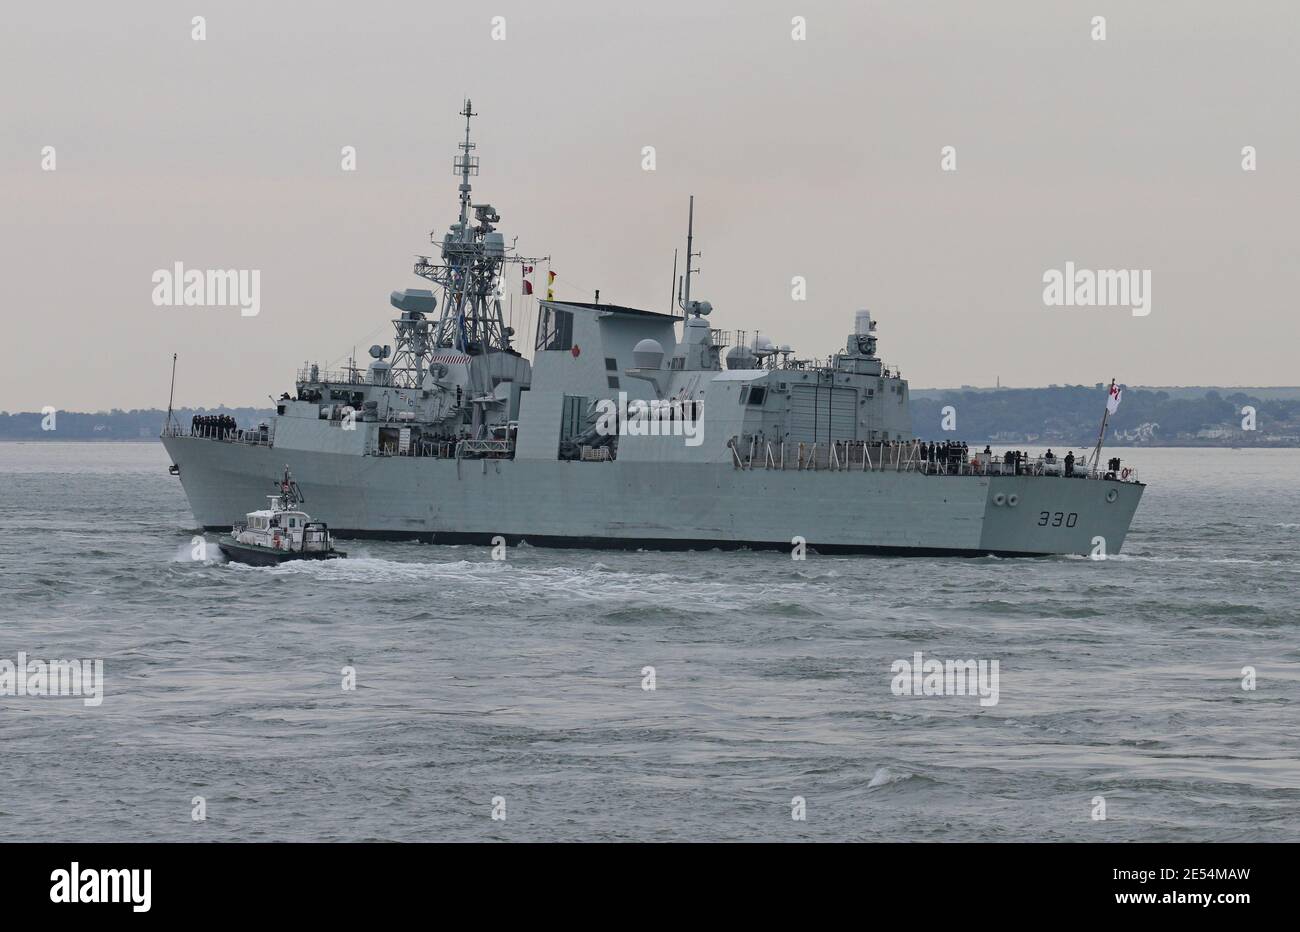 The Royal Canadian Navy frigate HMCS HALIFAX (FFH330) is escorted by a pilot vessel as it turns and heads into The Solent Stock Photo